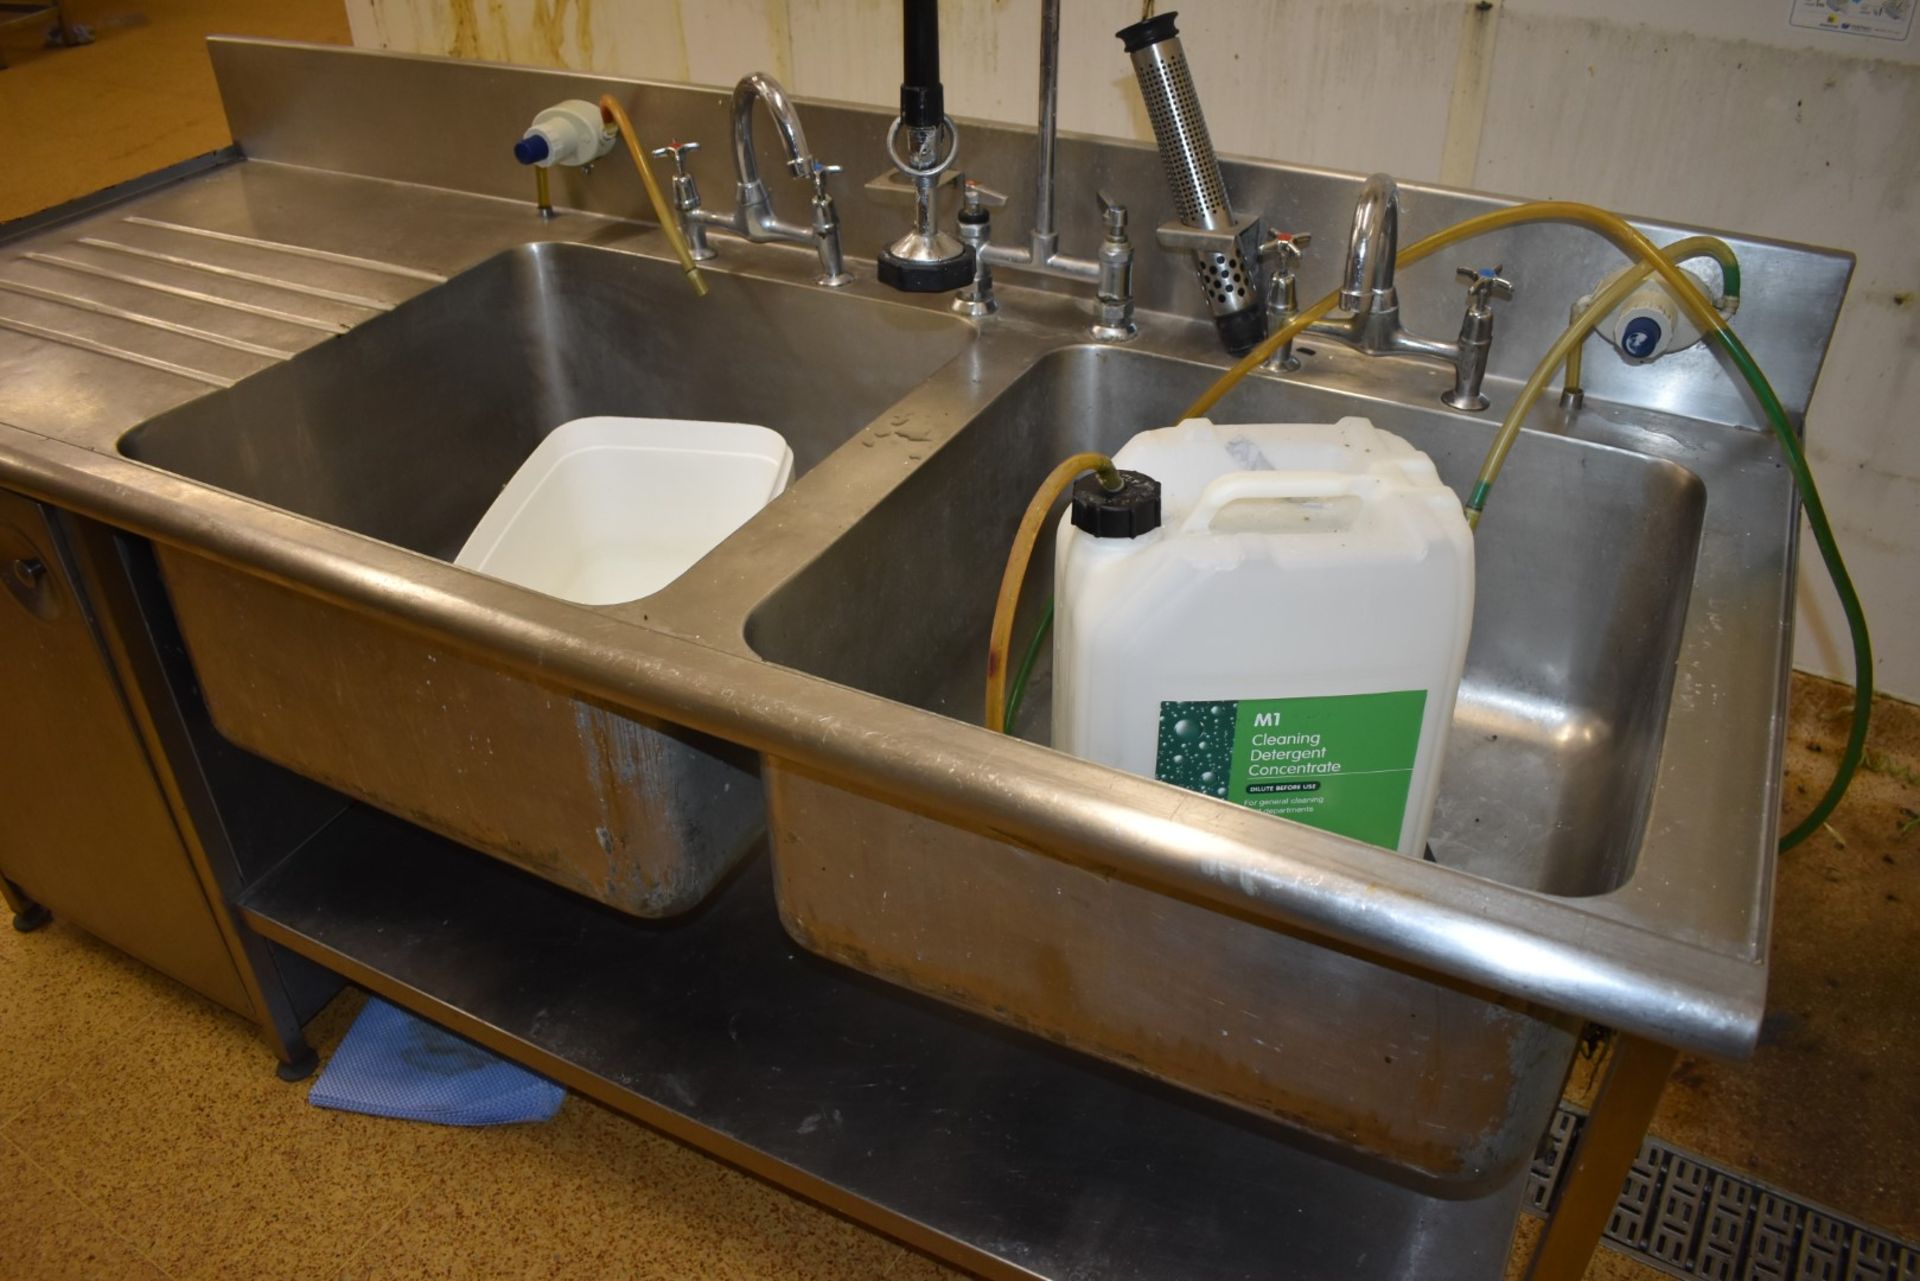 1 x Stainless Steel Twin Sink Basin With Two Large Sink Basins, Drainer, Cupboard, Undershelf, - Image 6 of 7